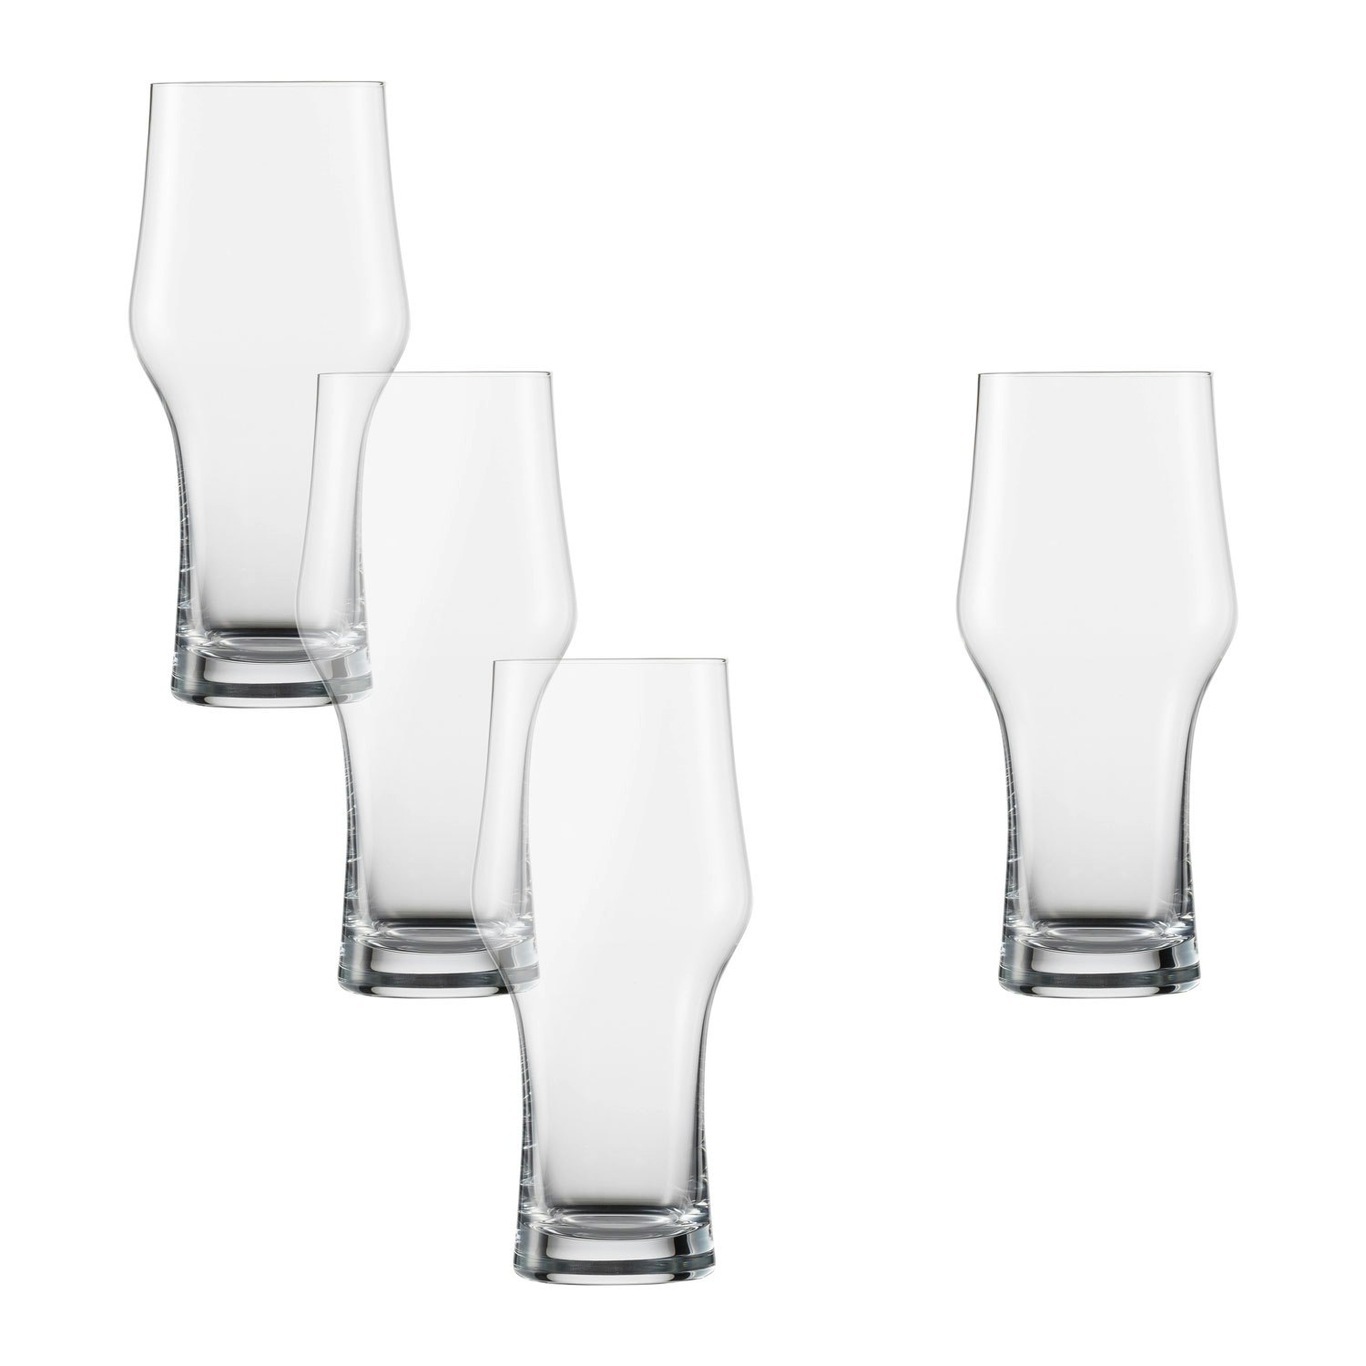 https://royaldesign.com/image/2/zwiesel-beer-basic-craft-ipa-beer-glass-54-cl-4-pack-0?w=800&quality=80